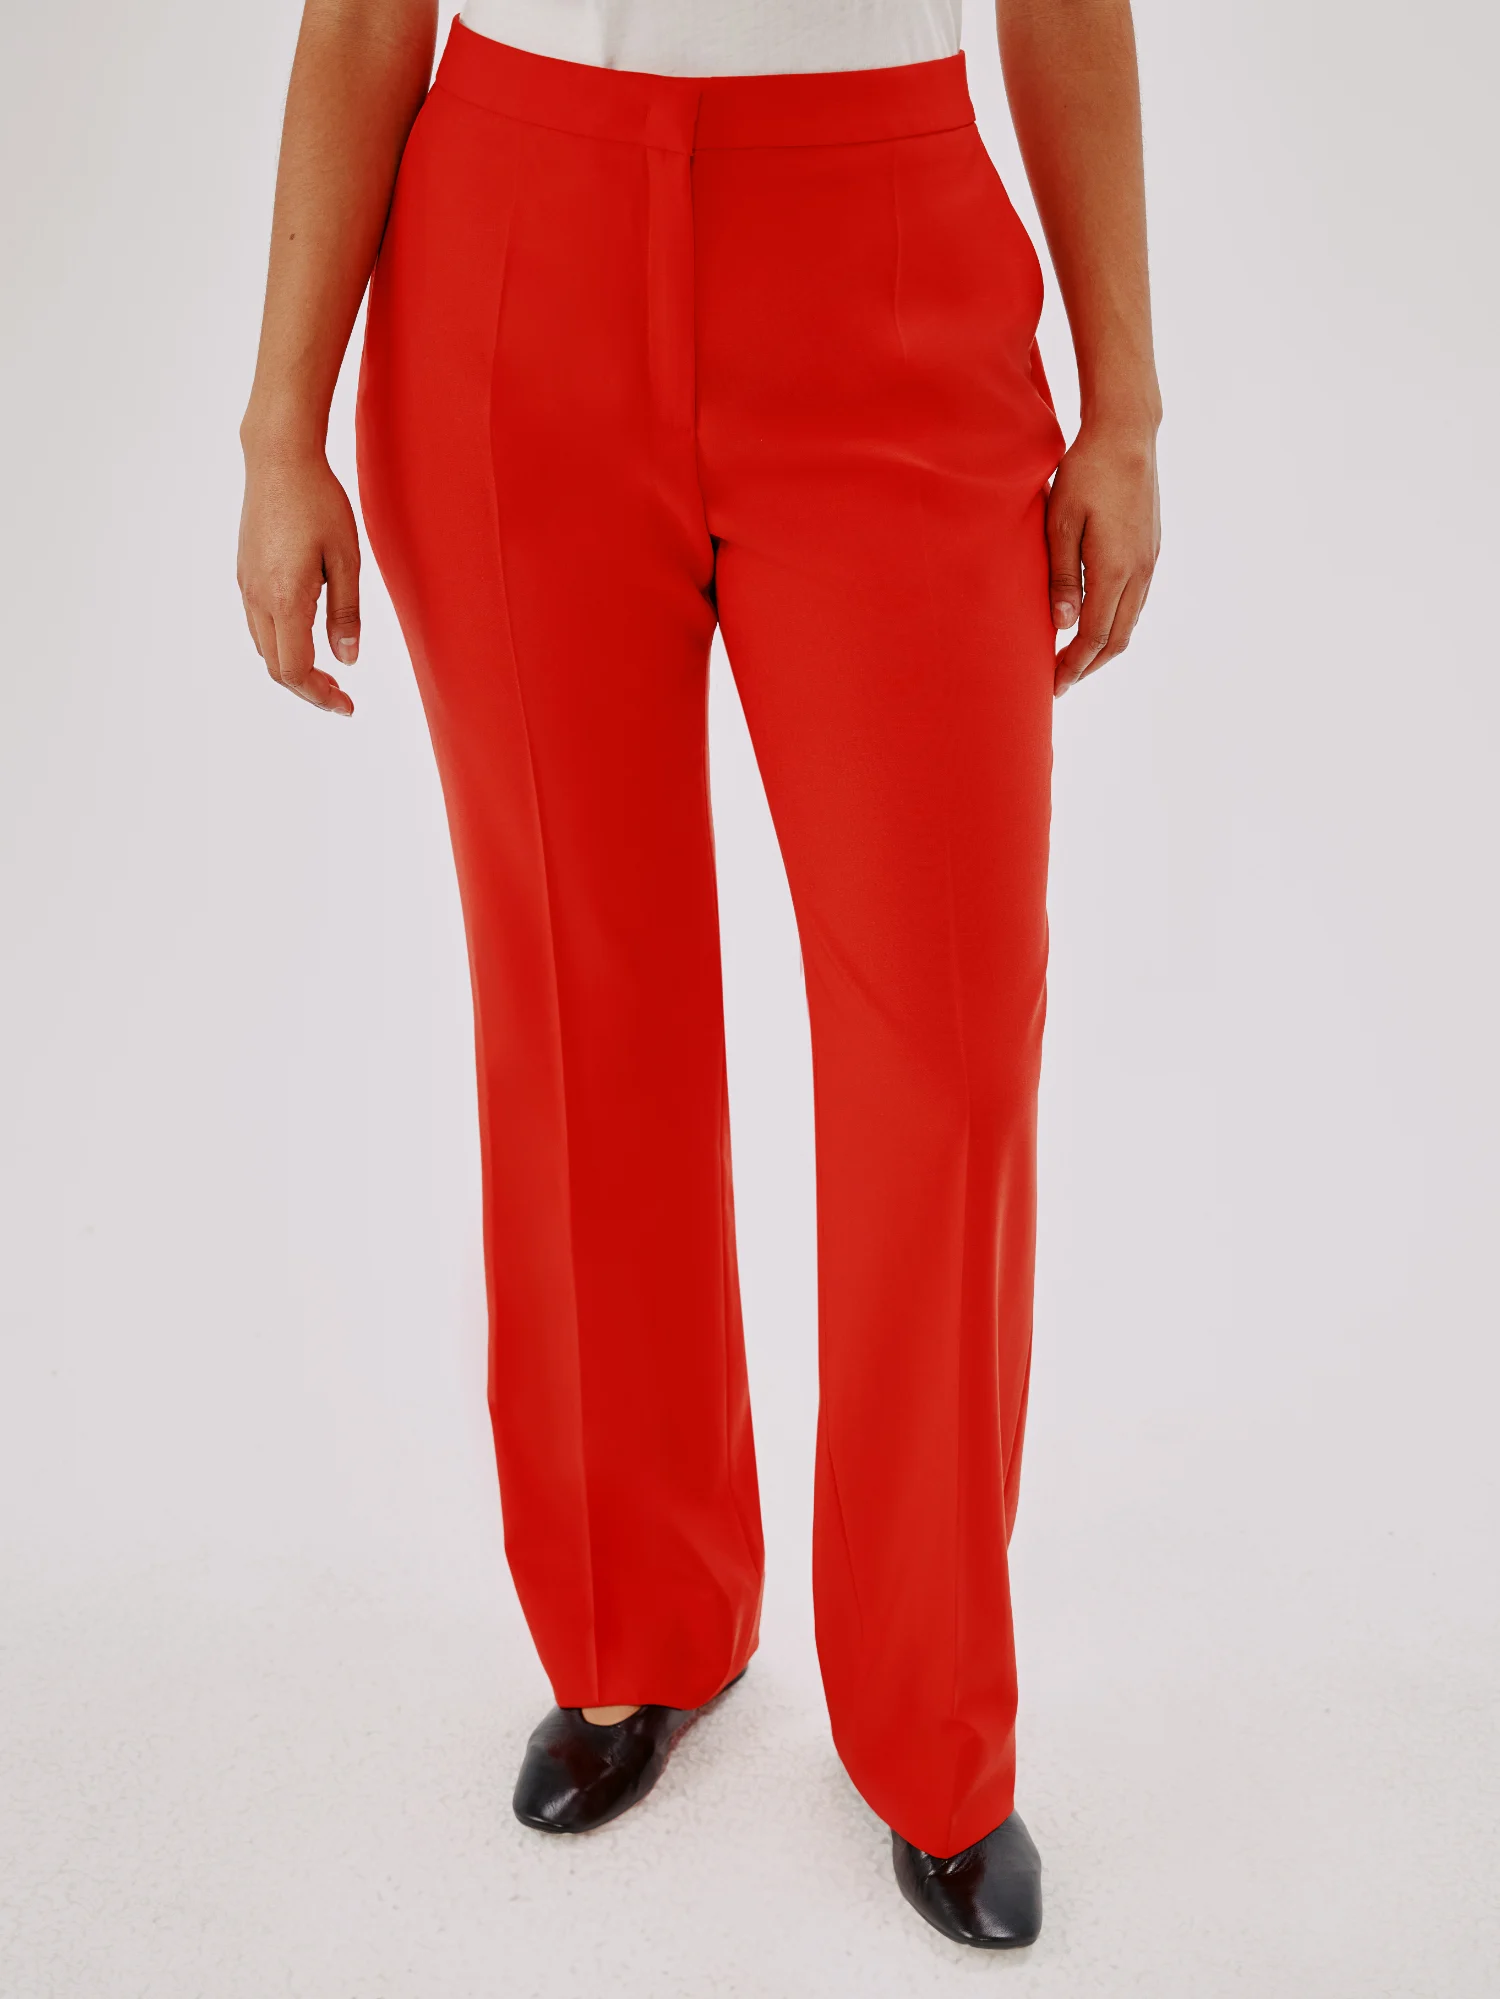 Best womens dress pants for work - for every budget